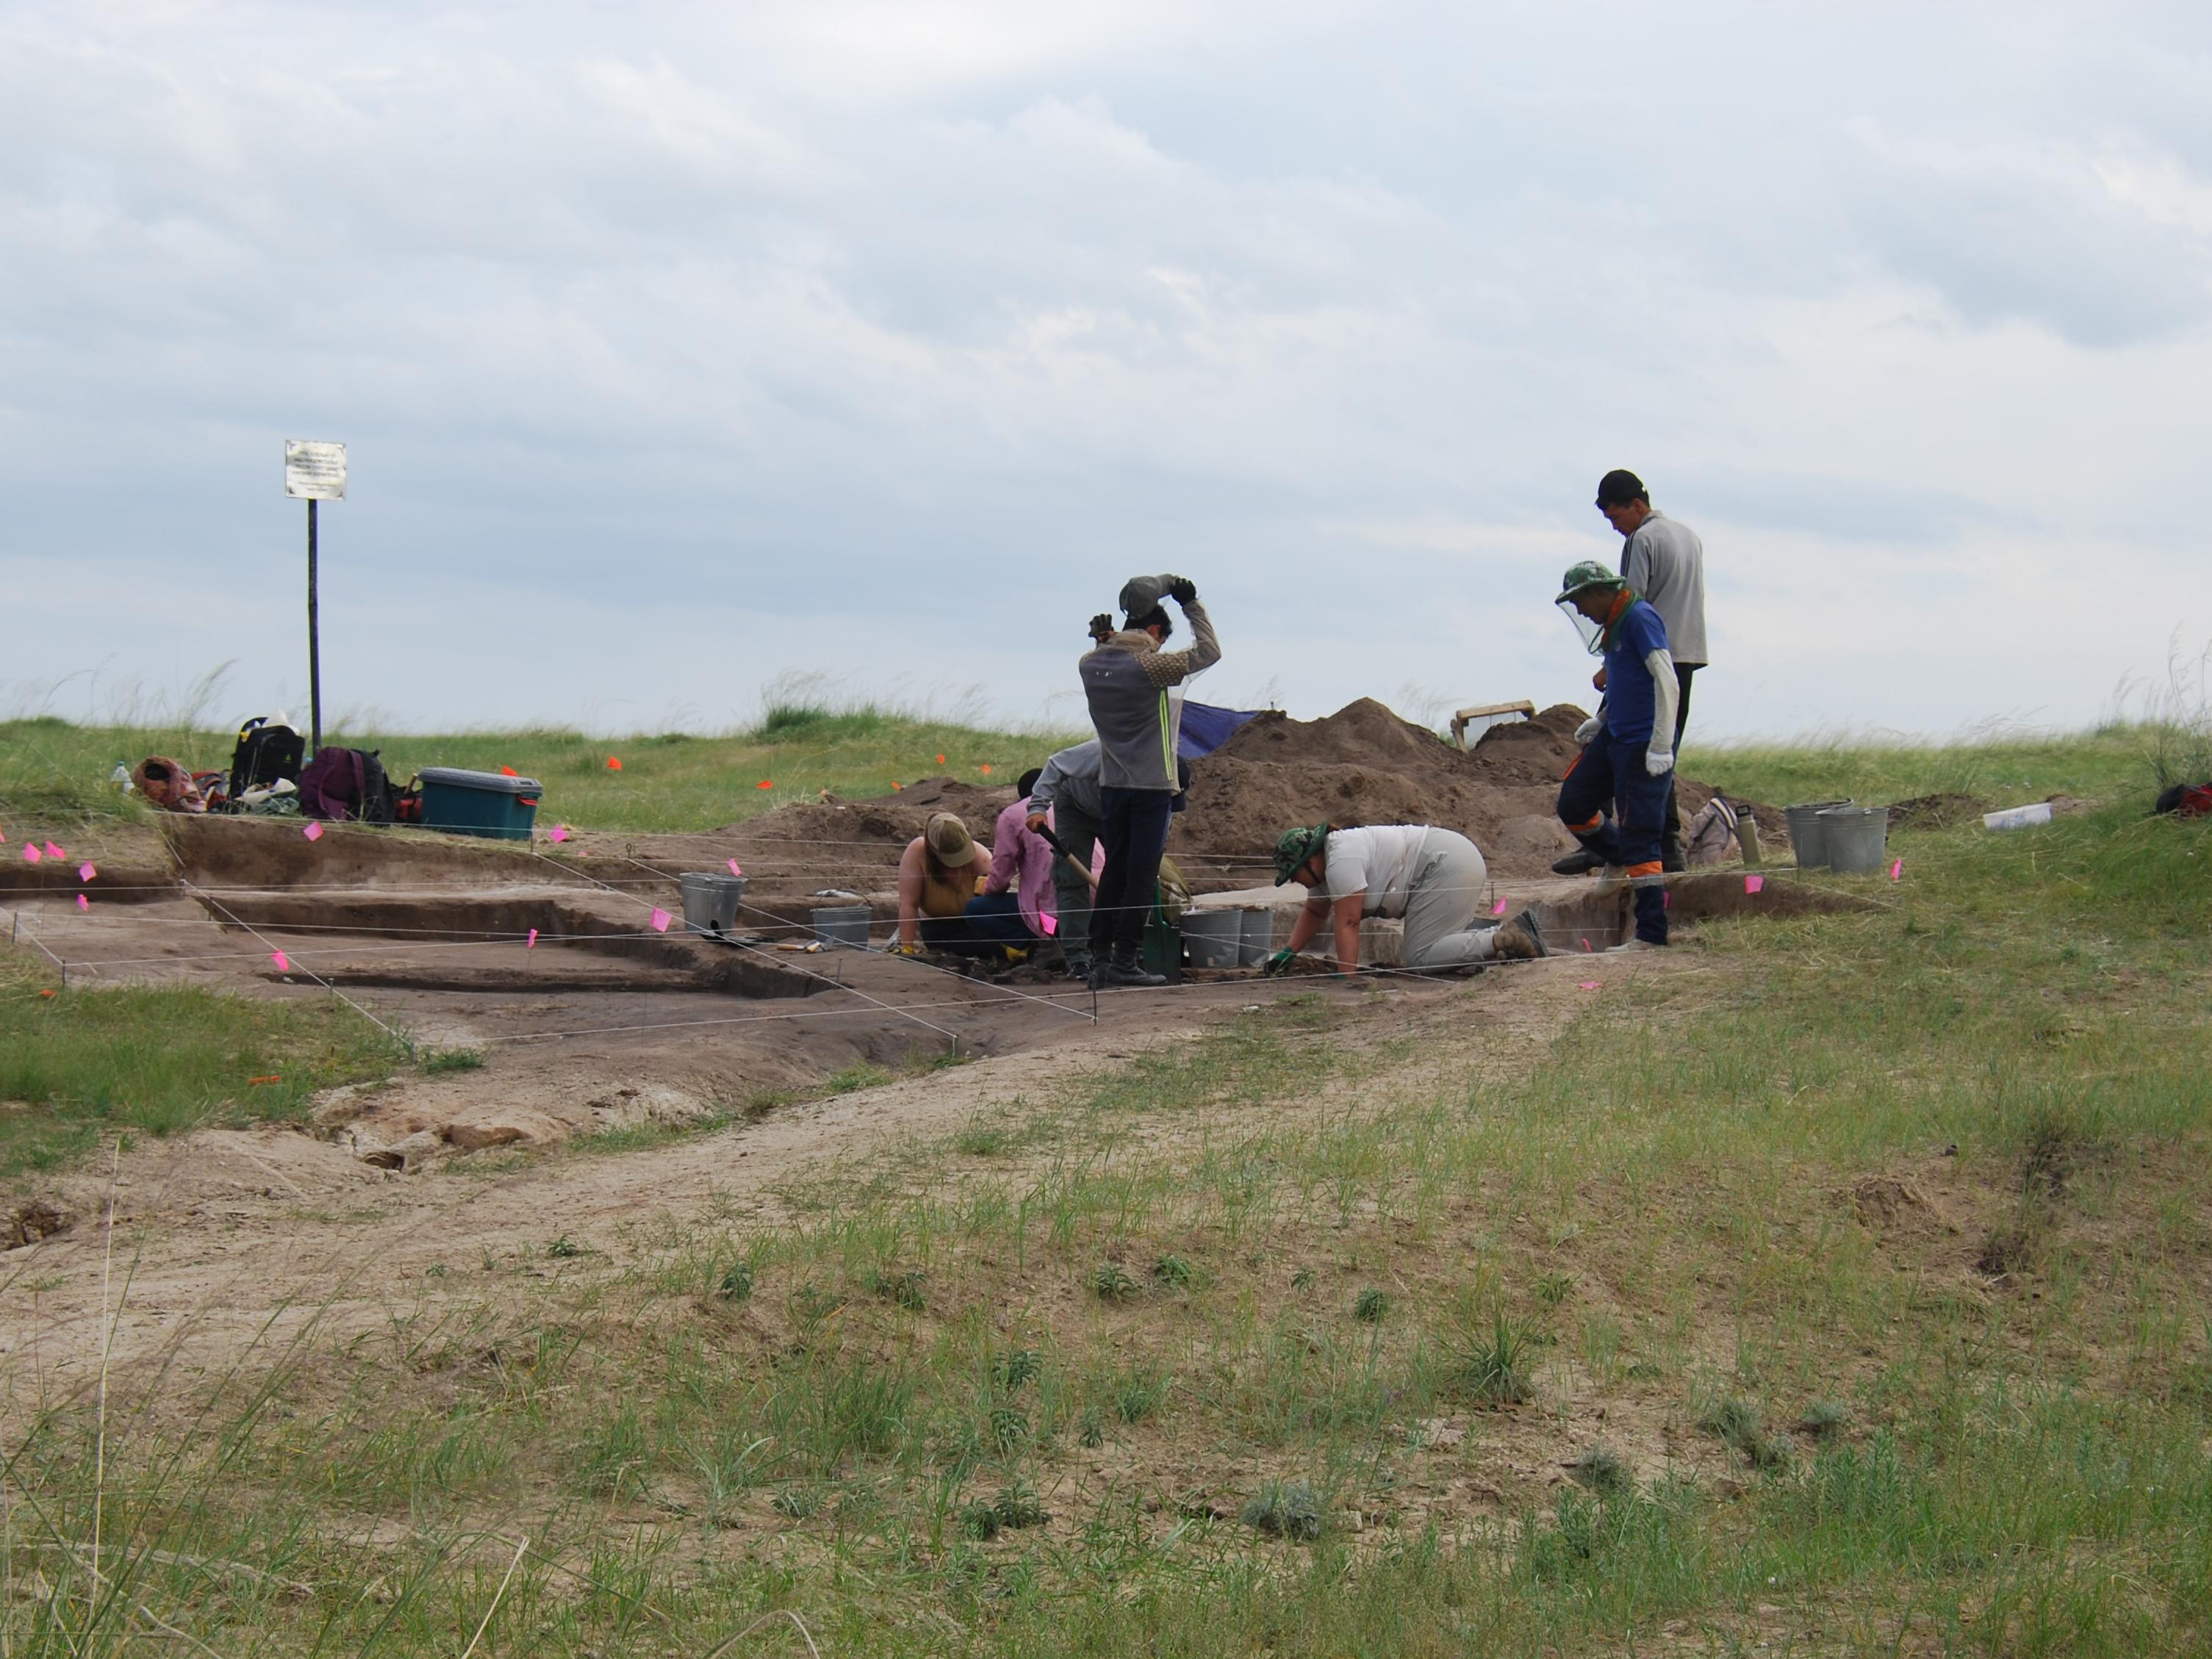 Archaeologists excavating arounda burial site on the Gobi Steppe